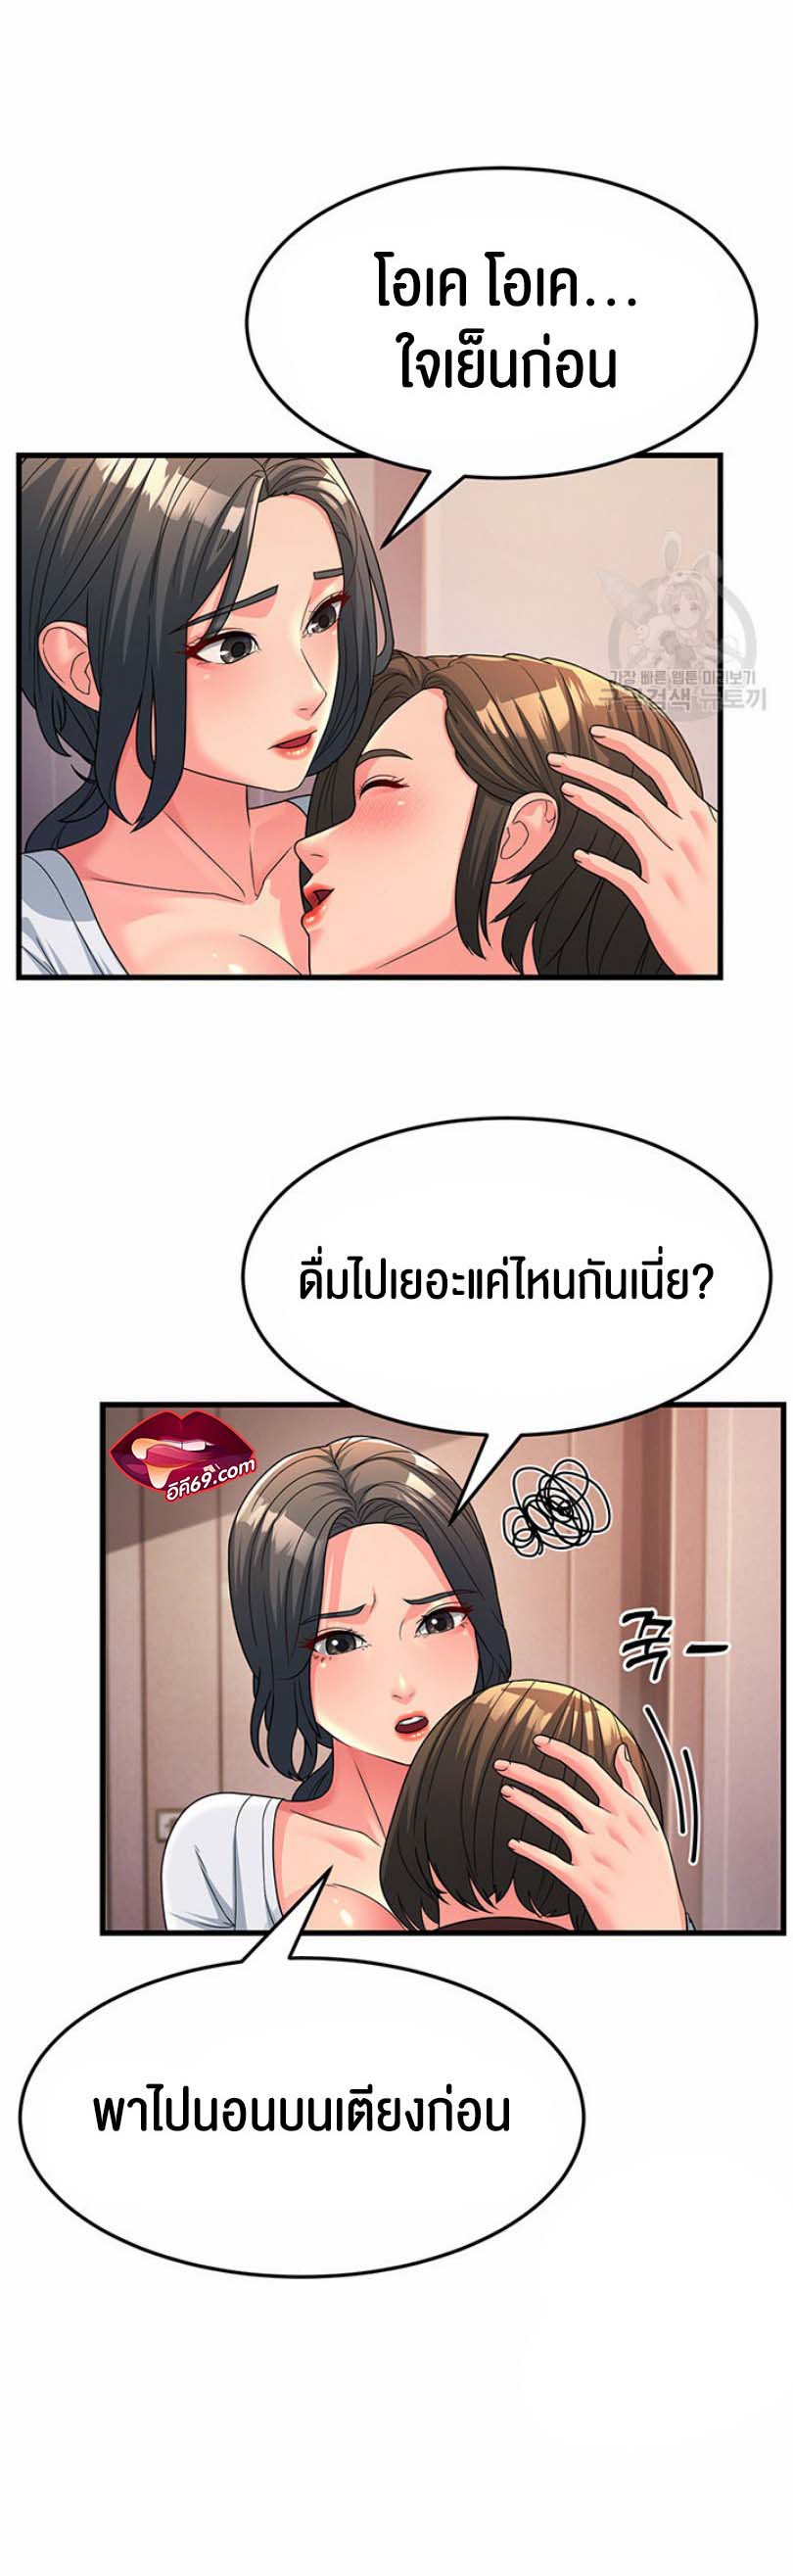 à¸­à¹ˆà¸²à¸™à¹‚à¸”à¸ˆà¸´à¸™ à¹€à¸£à¸·à¹ˆà¸­à¸‡ Mother in Law Bends To My Will 9 42